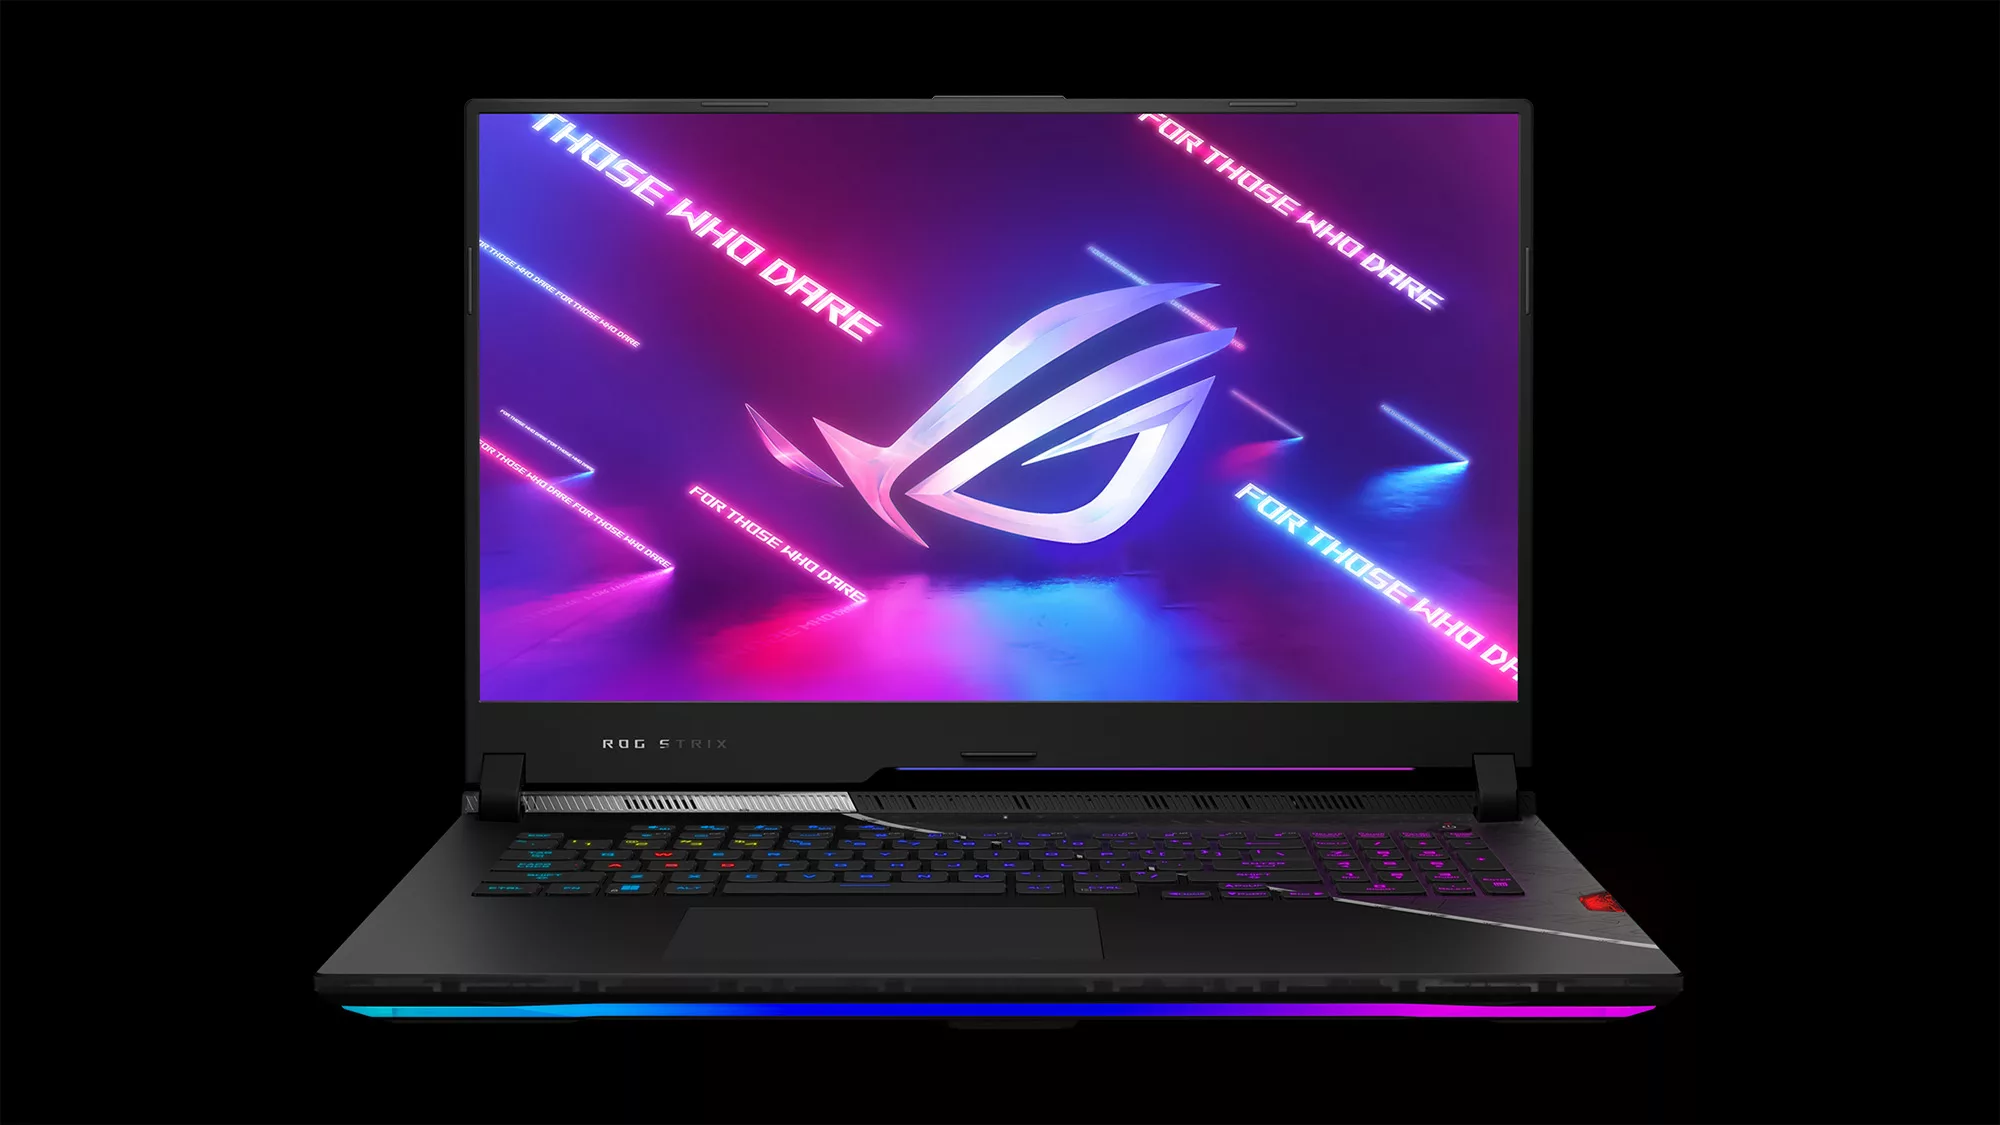 Strix SCAR laptop with ROG eye logo visible on the screen.